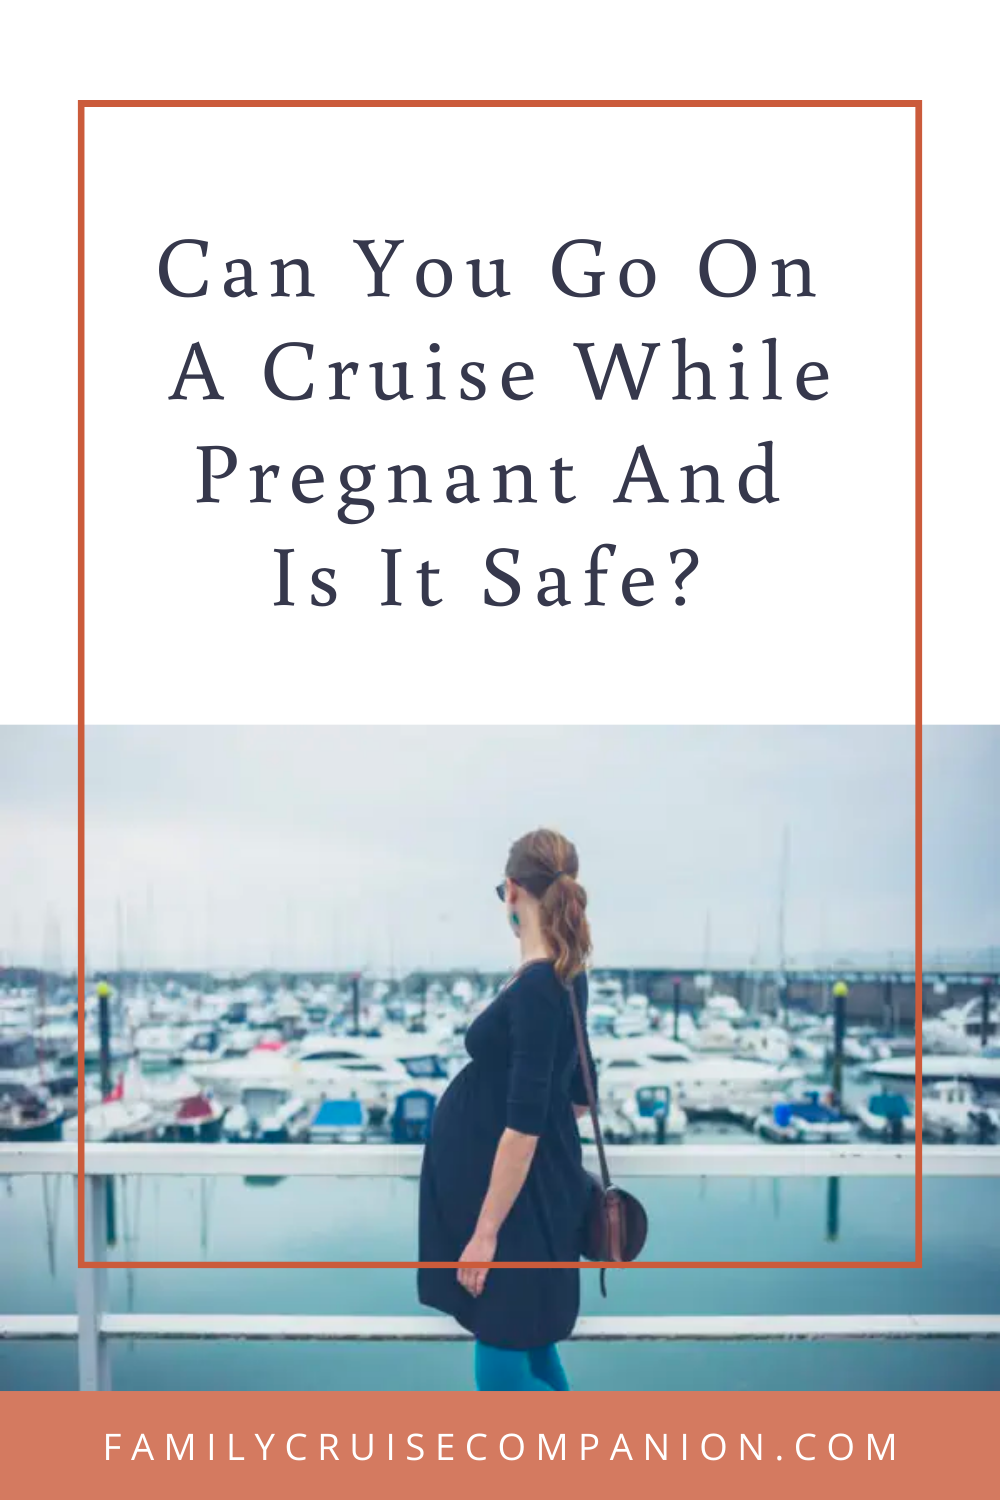 carnival cruise pregnancy guidelines